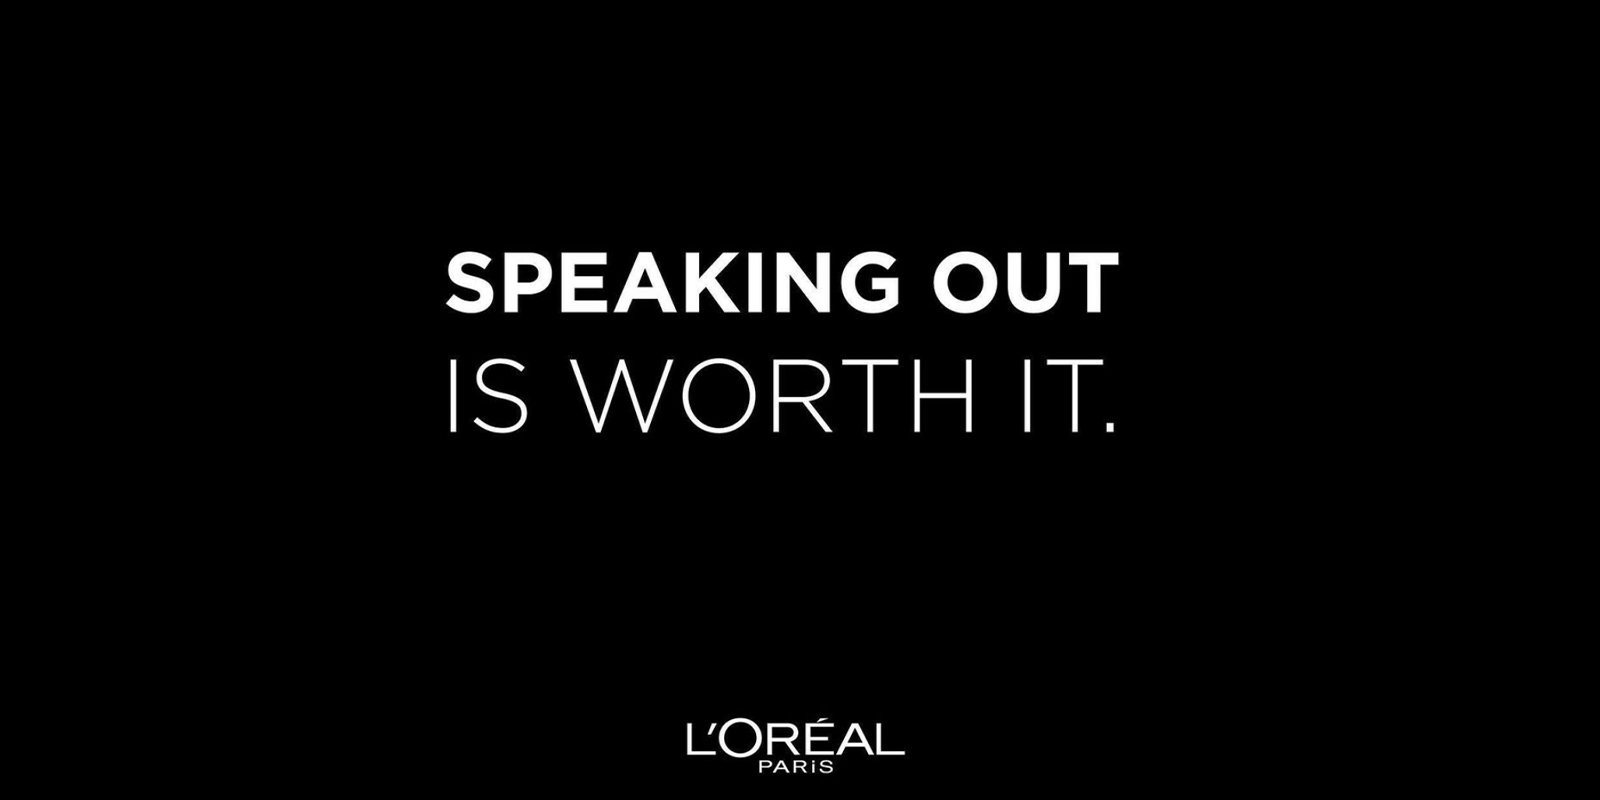 Loreal, diversity, standing up for values, makeup brand being reactive